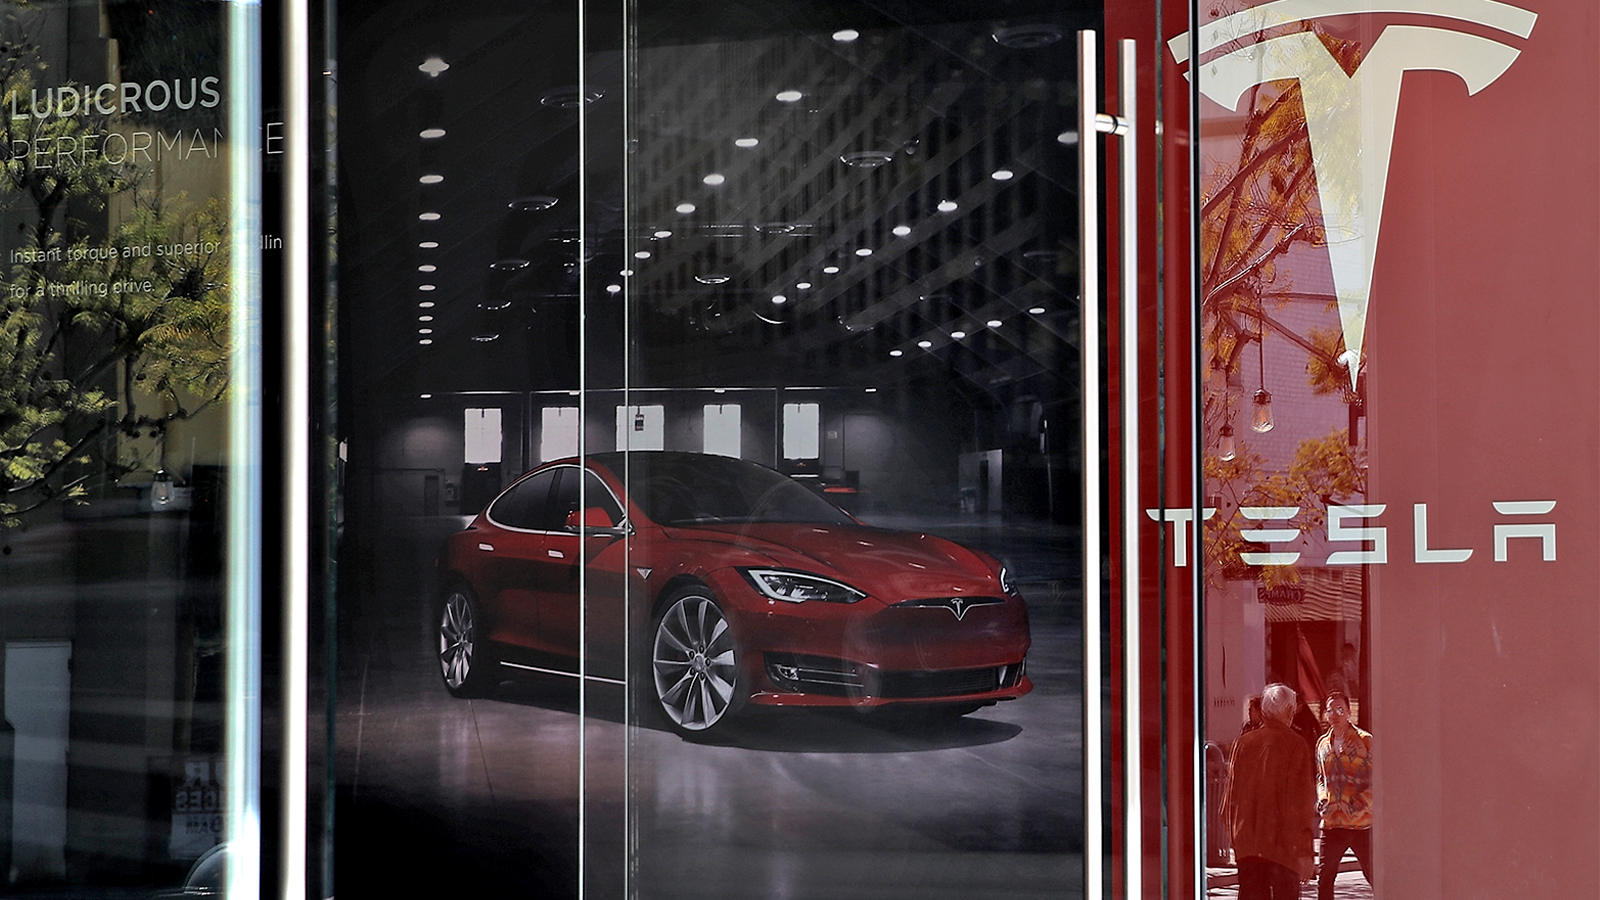 Tesla showroom viewed from outside; red car and banner with Tesla logo visible through window